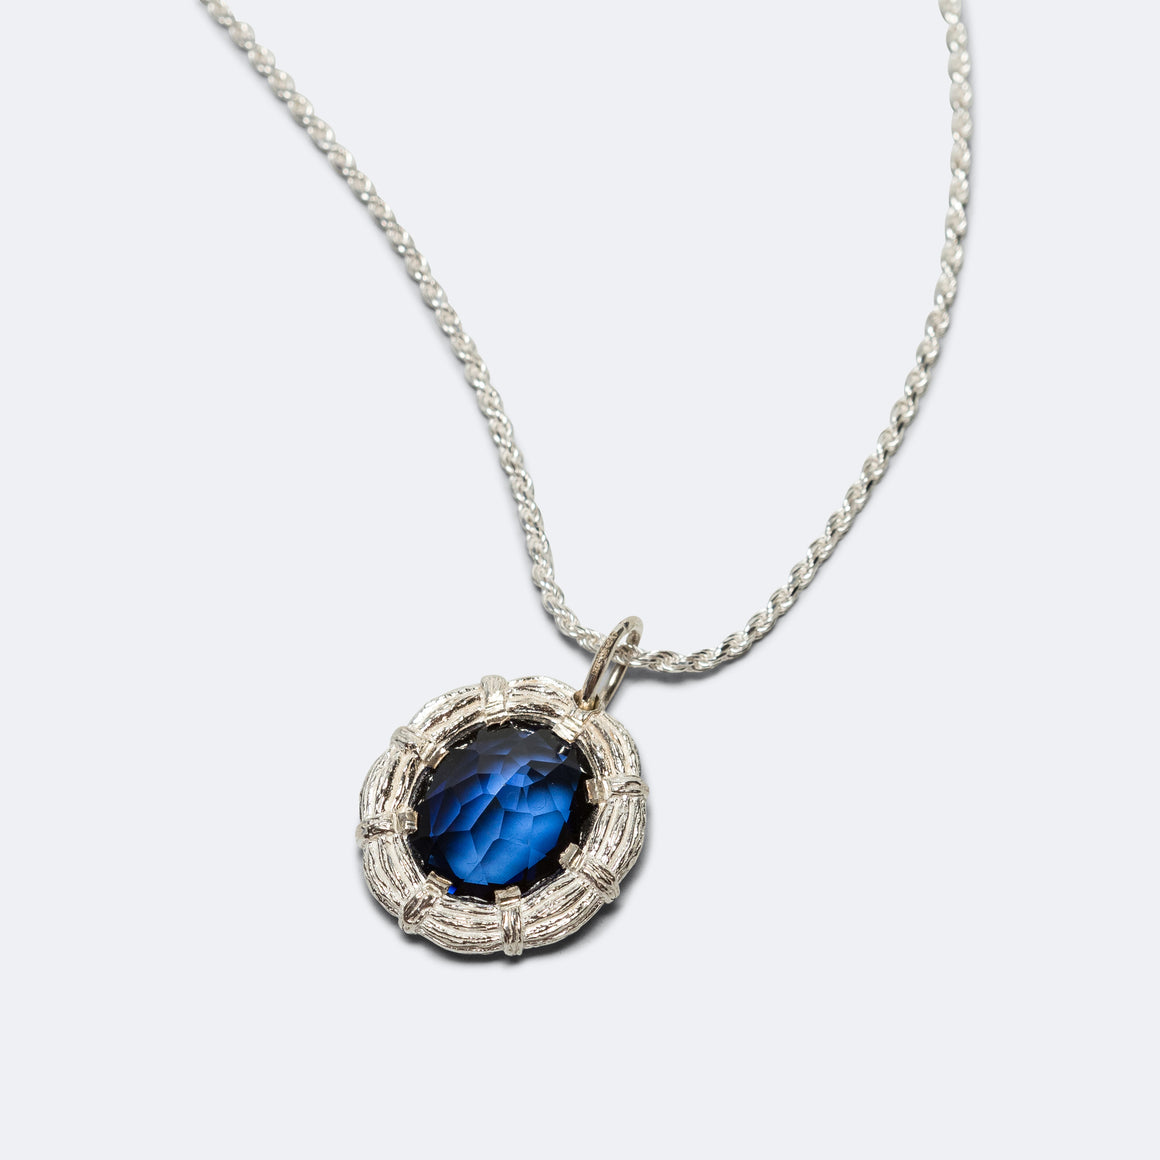 Bound Willow Pendant - 925 Silver/Blue Sapphire